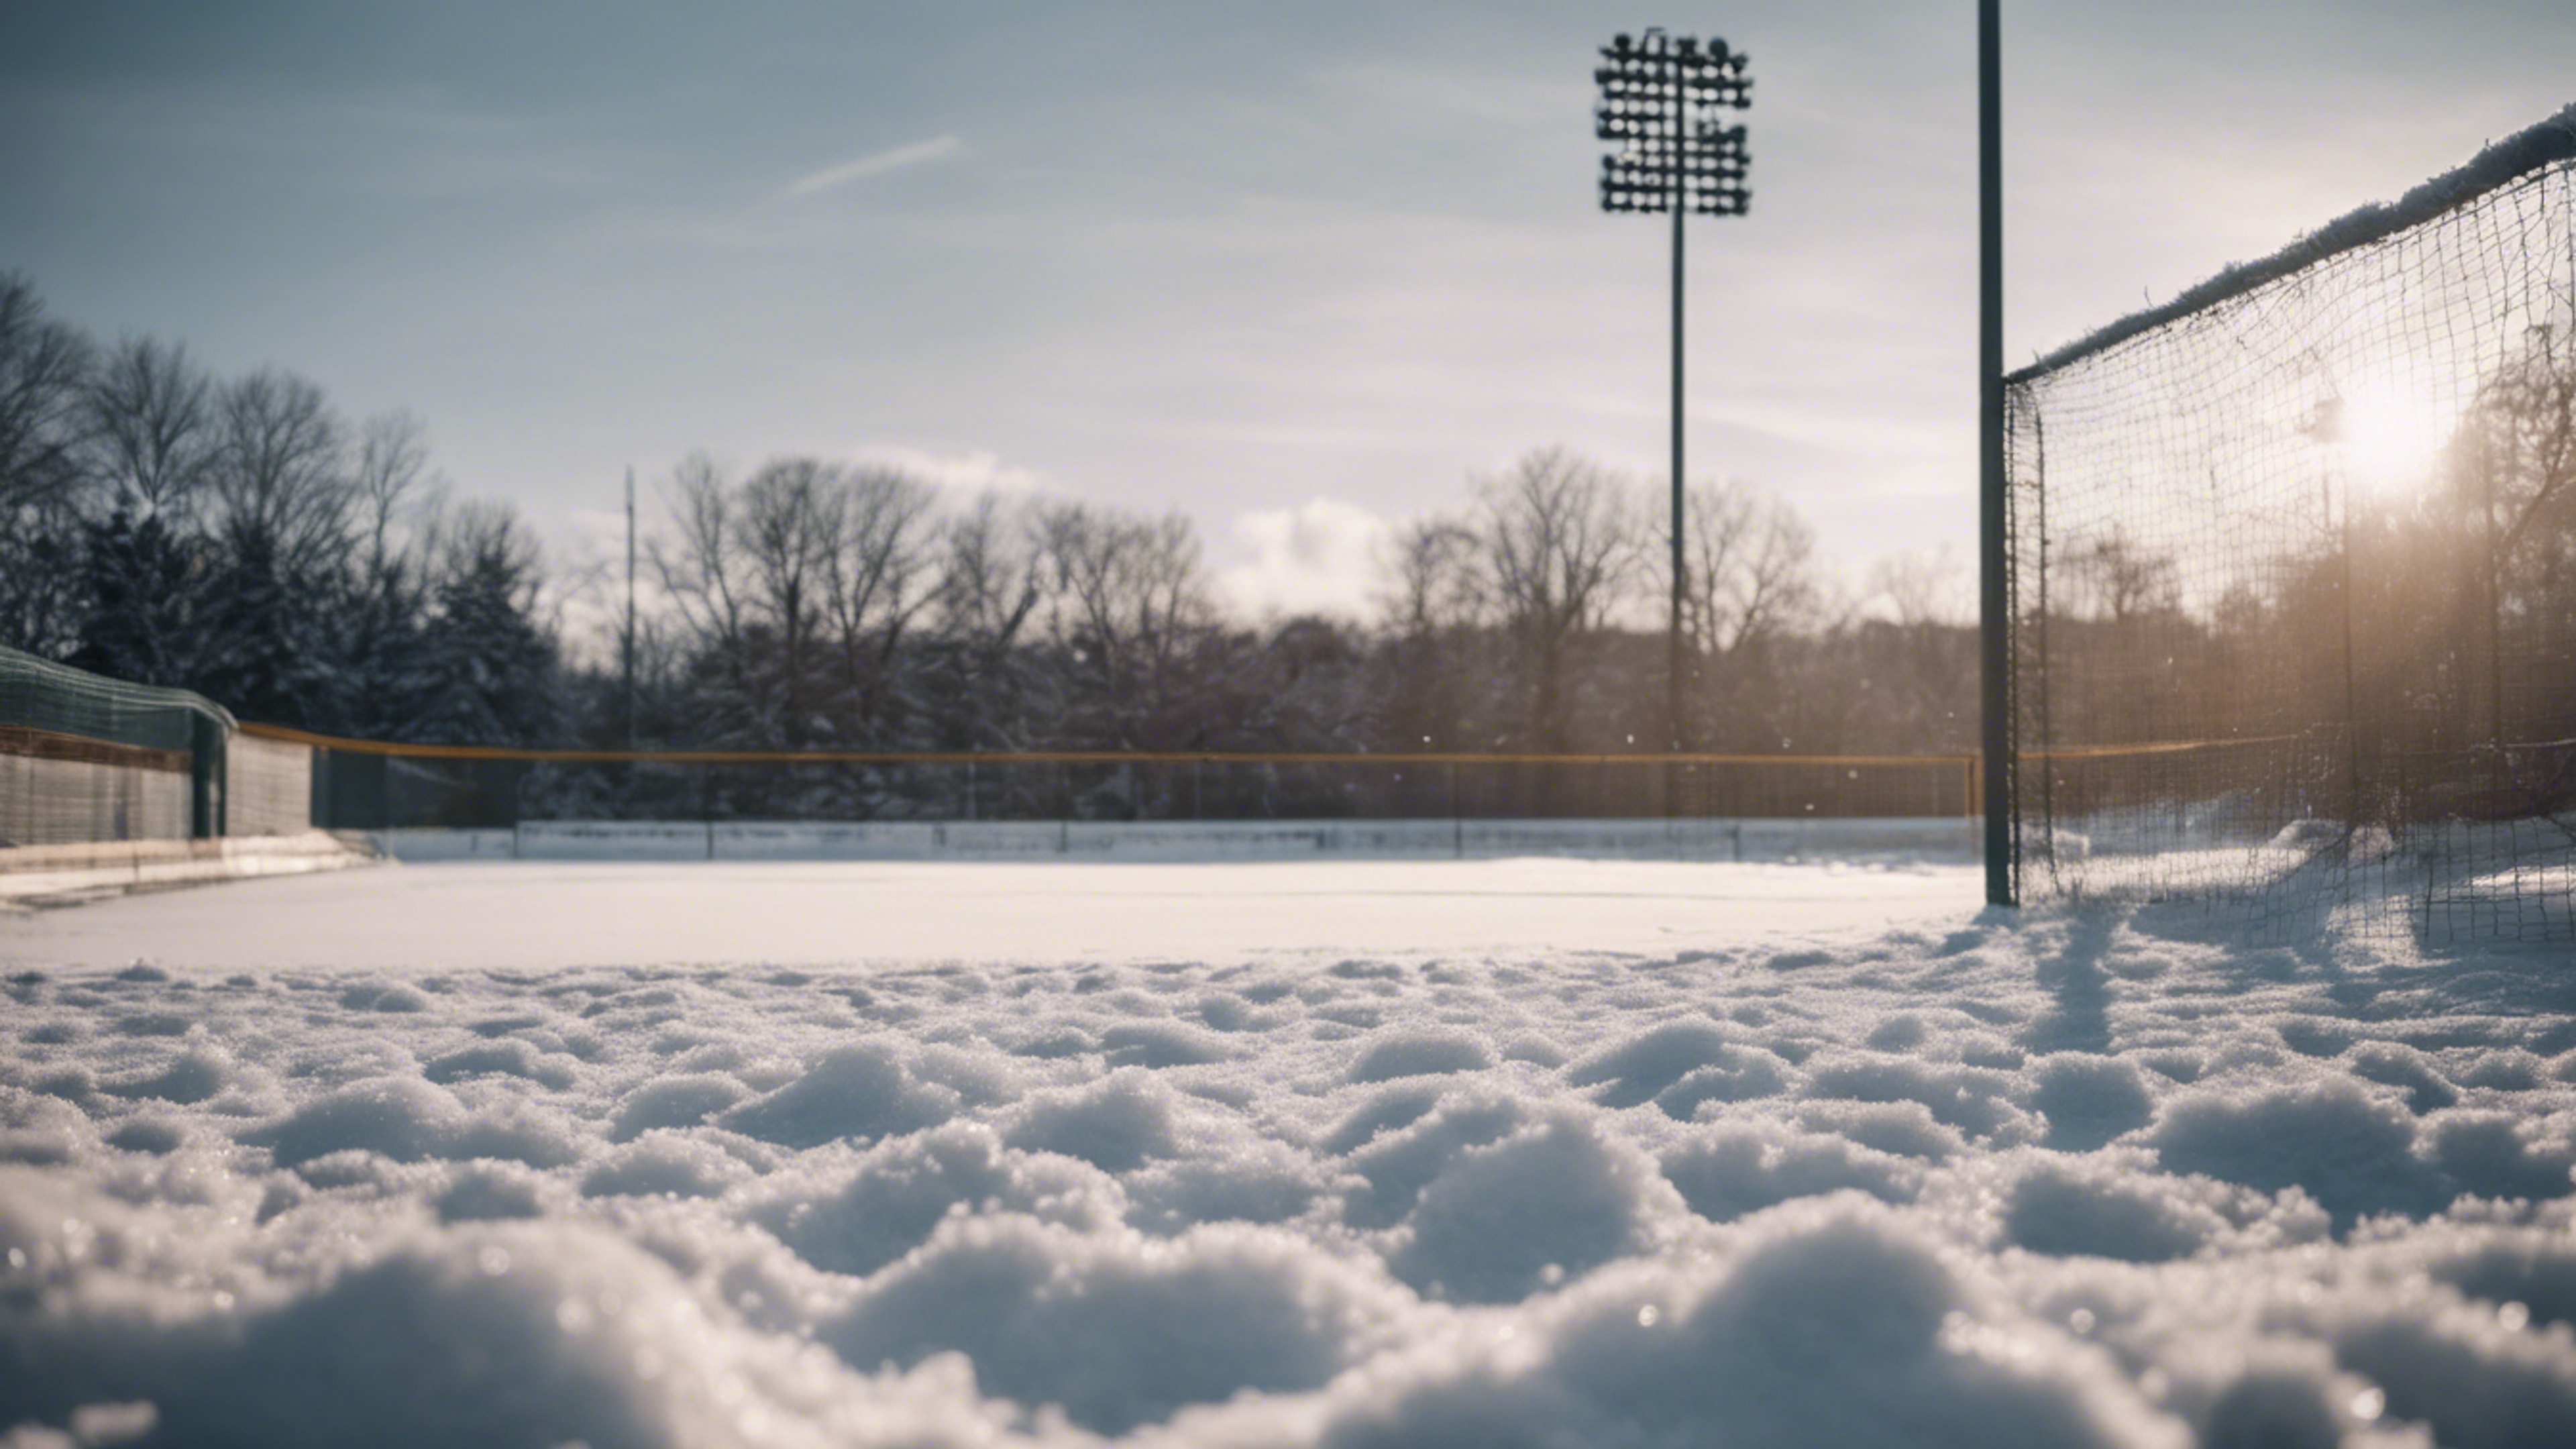 A baseball field covered in a thin layer of snow during off-season. Ფონი[abf98c57f7b048239f2f]